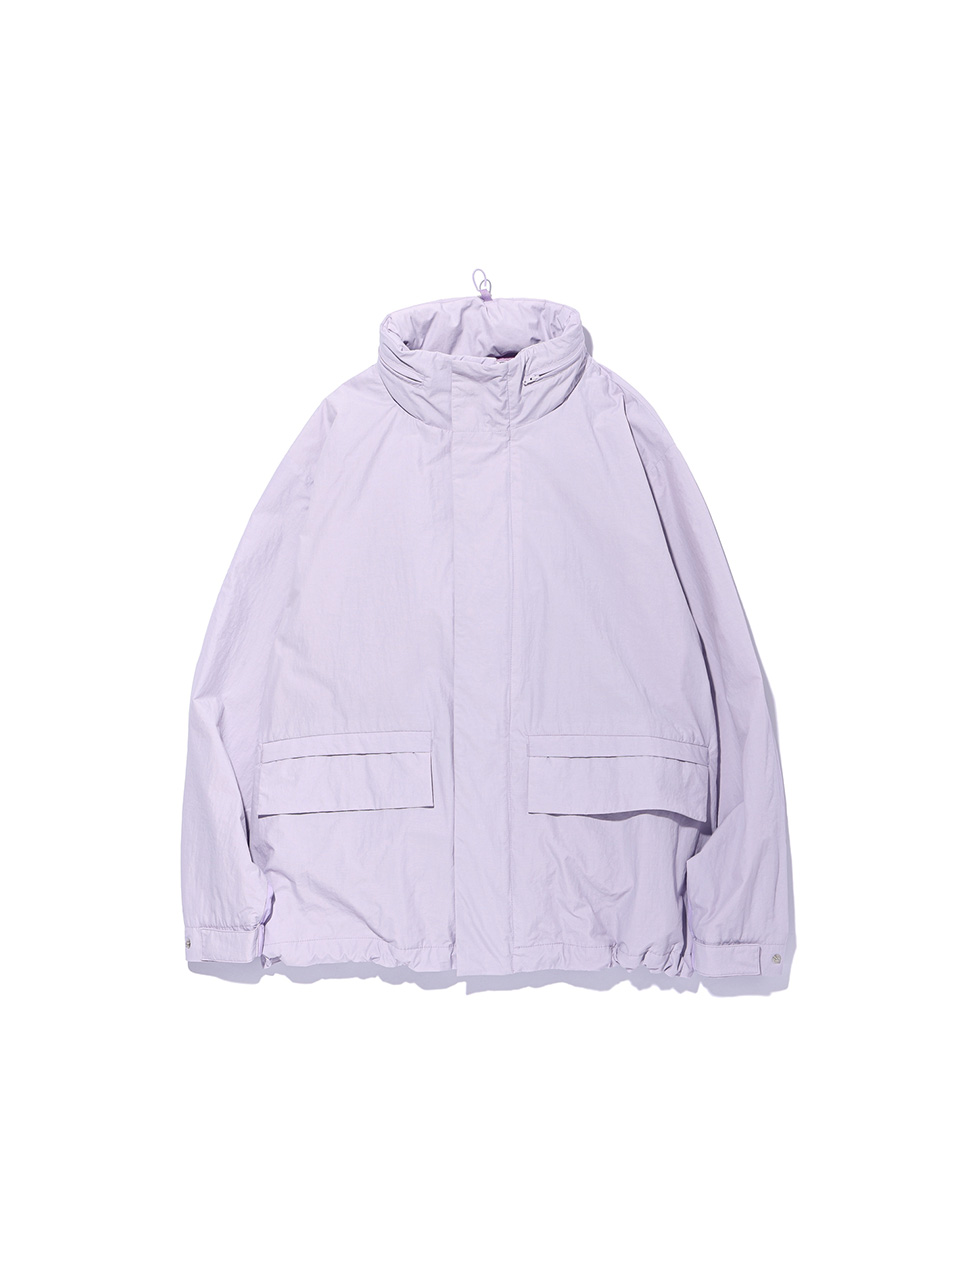 [Ourselves] TECHNICAL MONSTER JACKET (Dusty lavender)